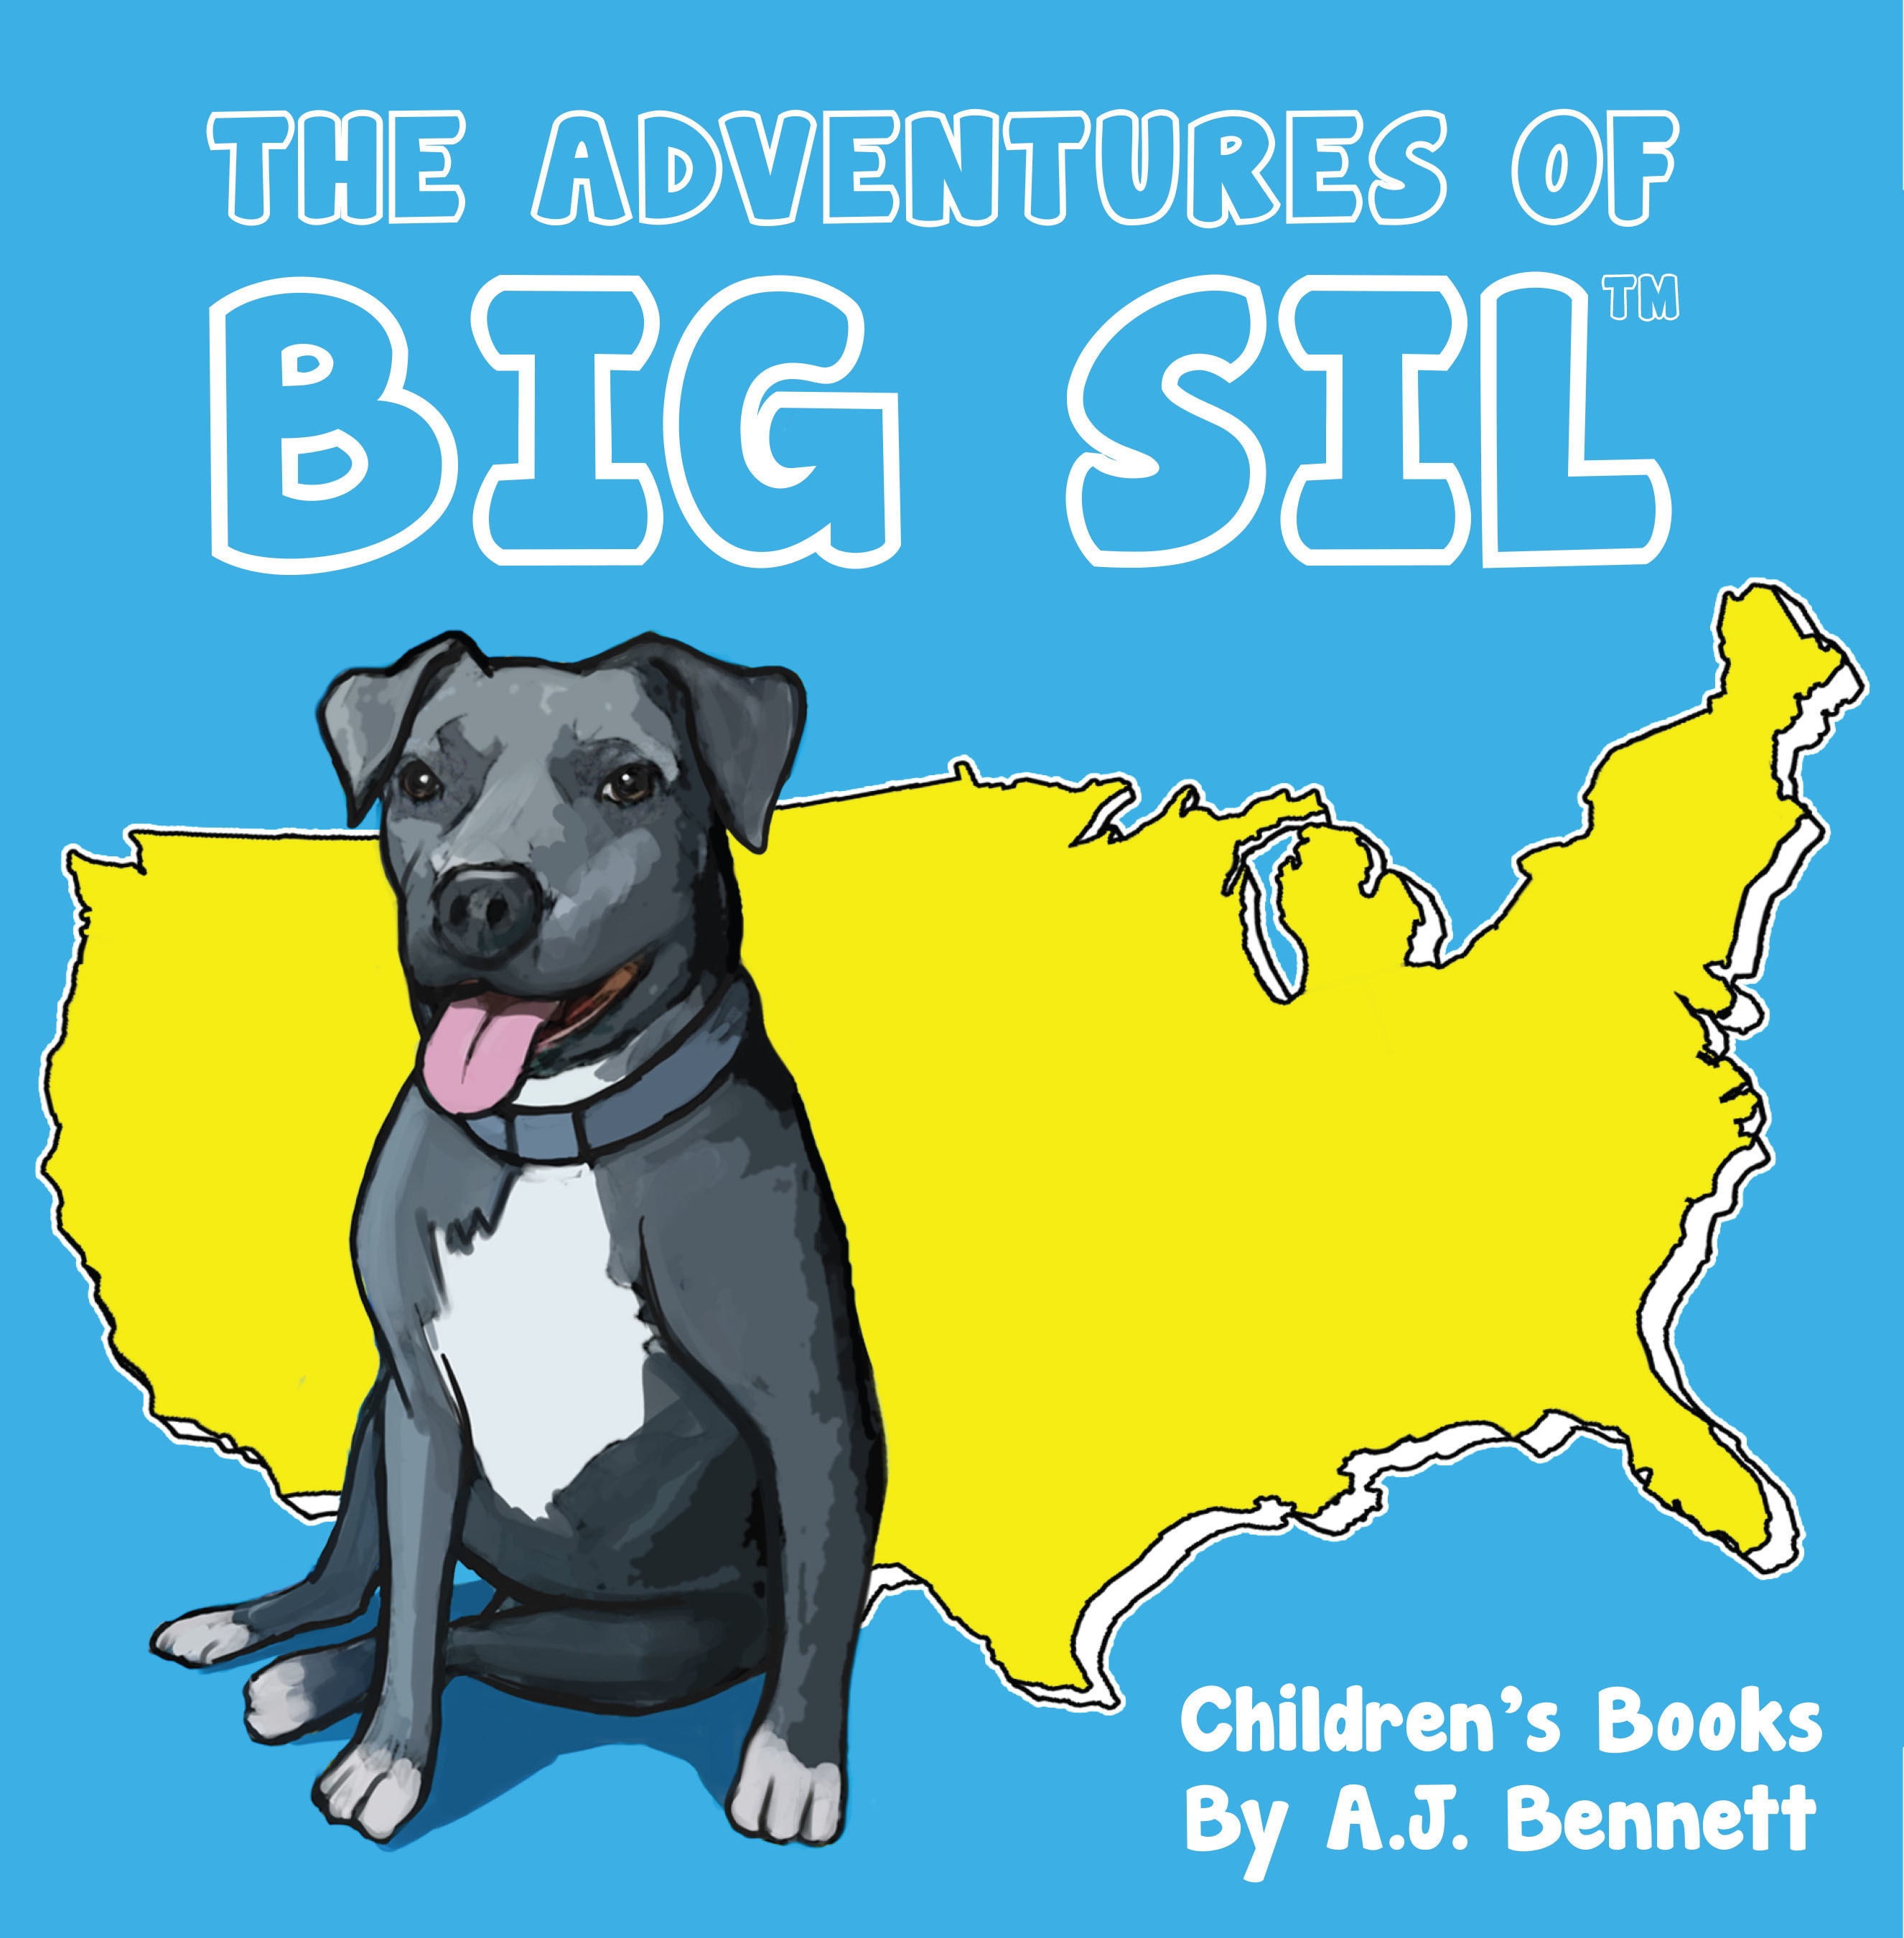 Explore cities across America with a loveable dog in The Adventures of Big Sil(TM) children's books.  These new educational children's books by A.J. Bennett are appropriate for children ages 2-4 and make learning fun with captivating color illustrations and photography. Also designed as an early reading book.